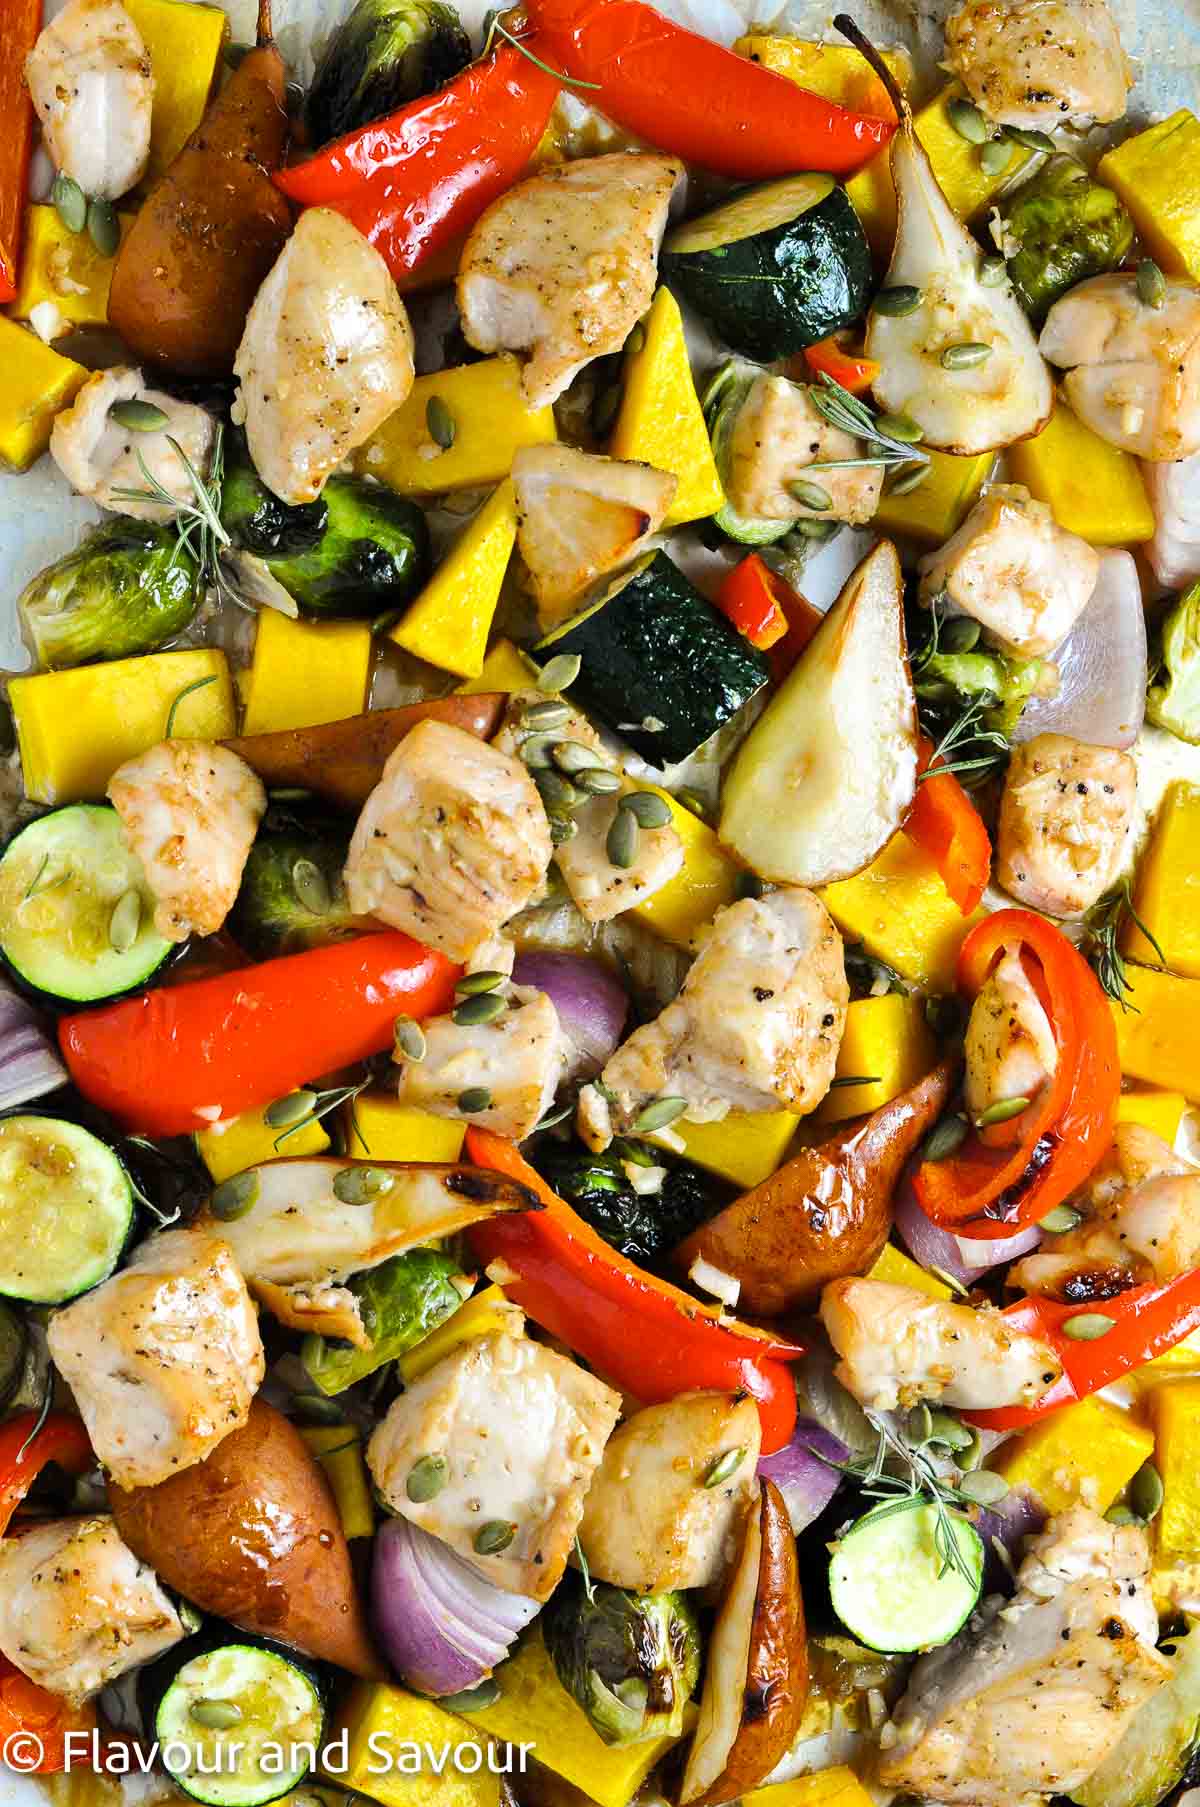 Maple Garlic Chicken Sheet Pan Dinner with seasonal vegetables and roasted pears.